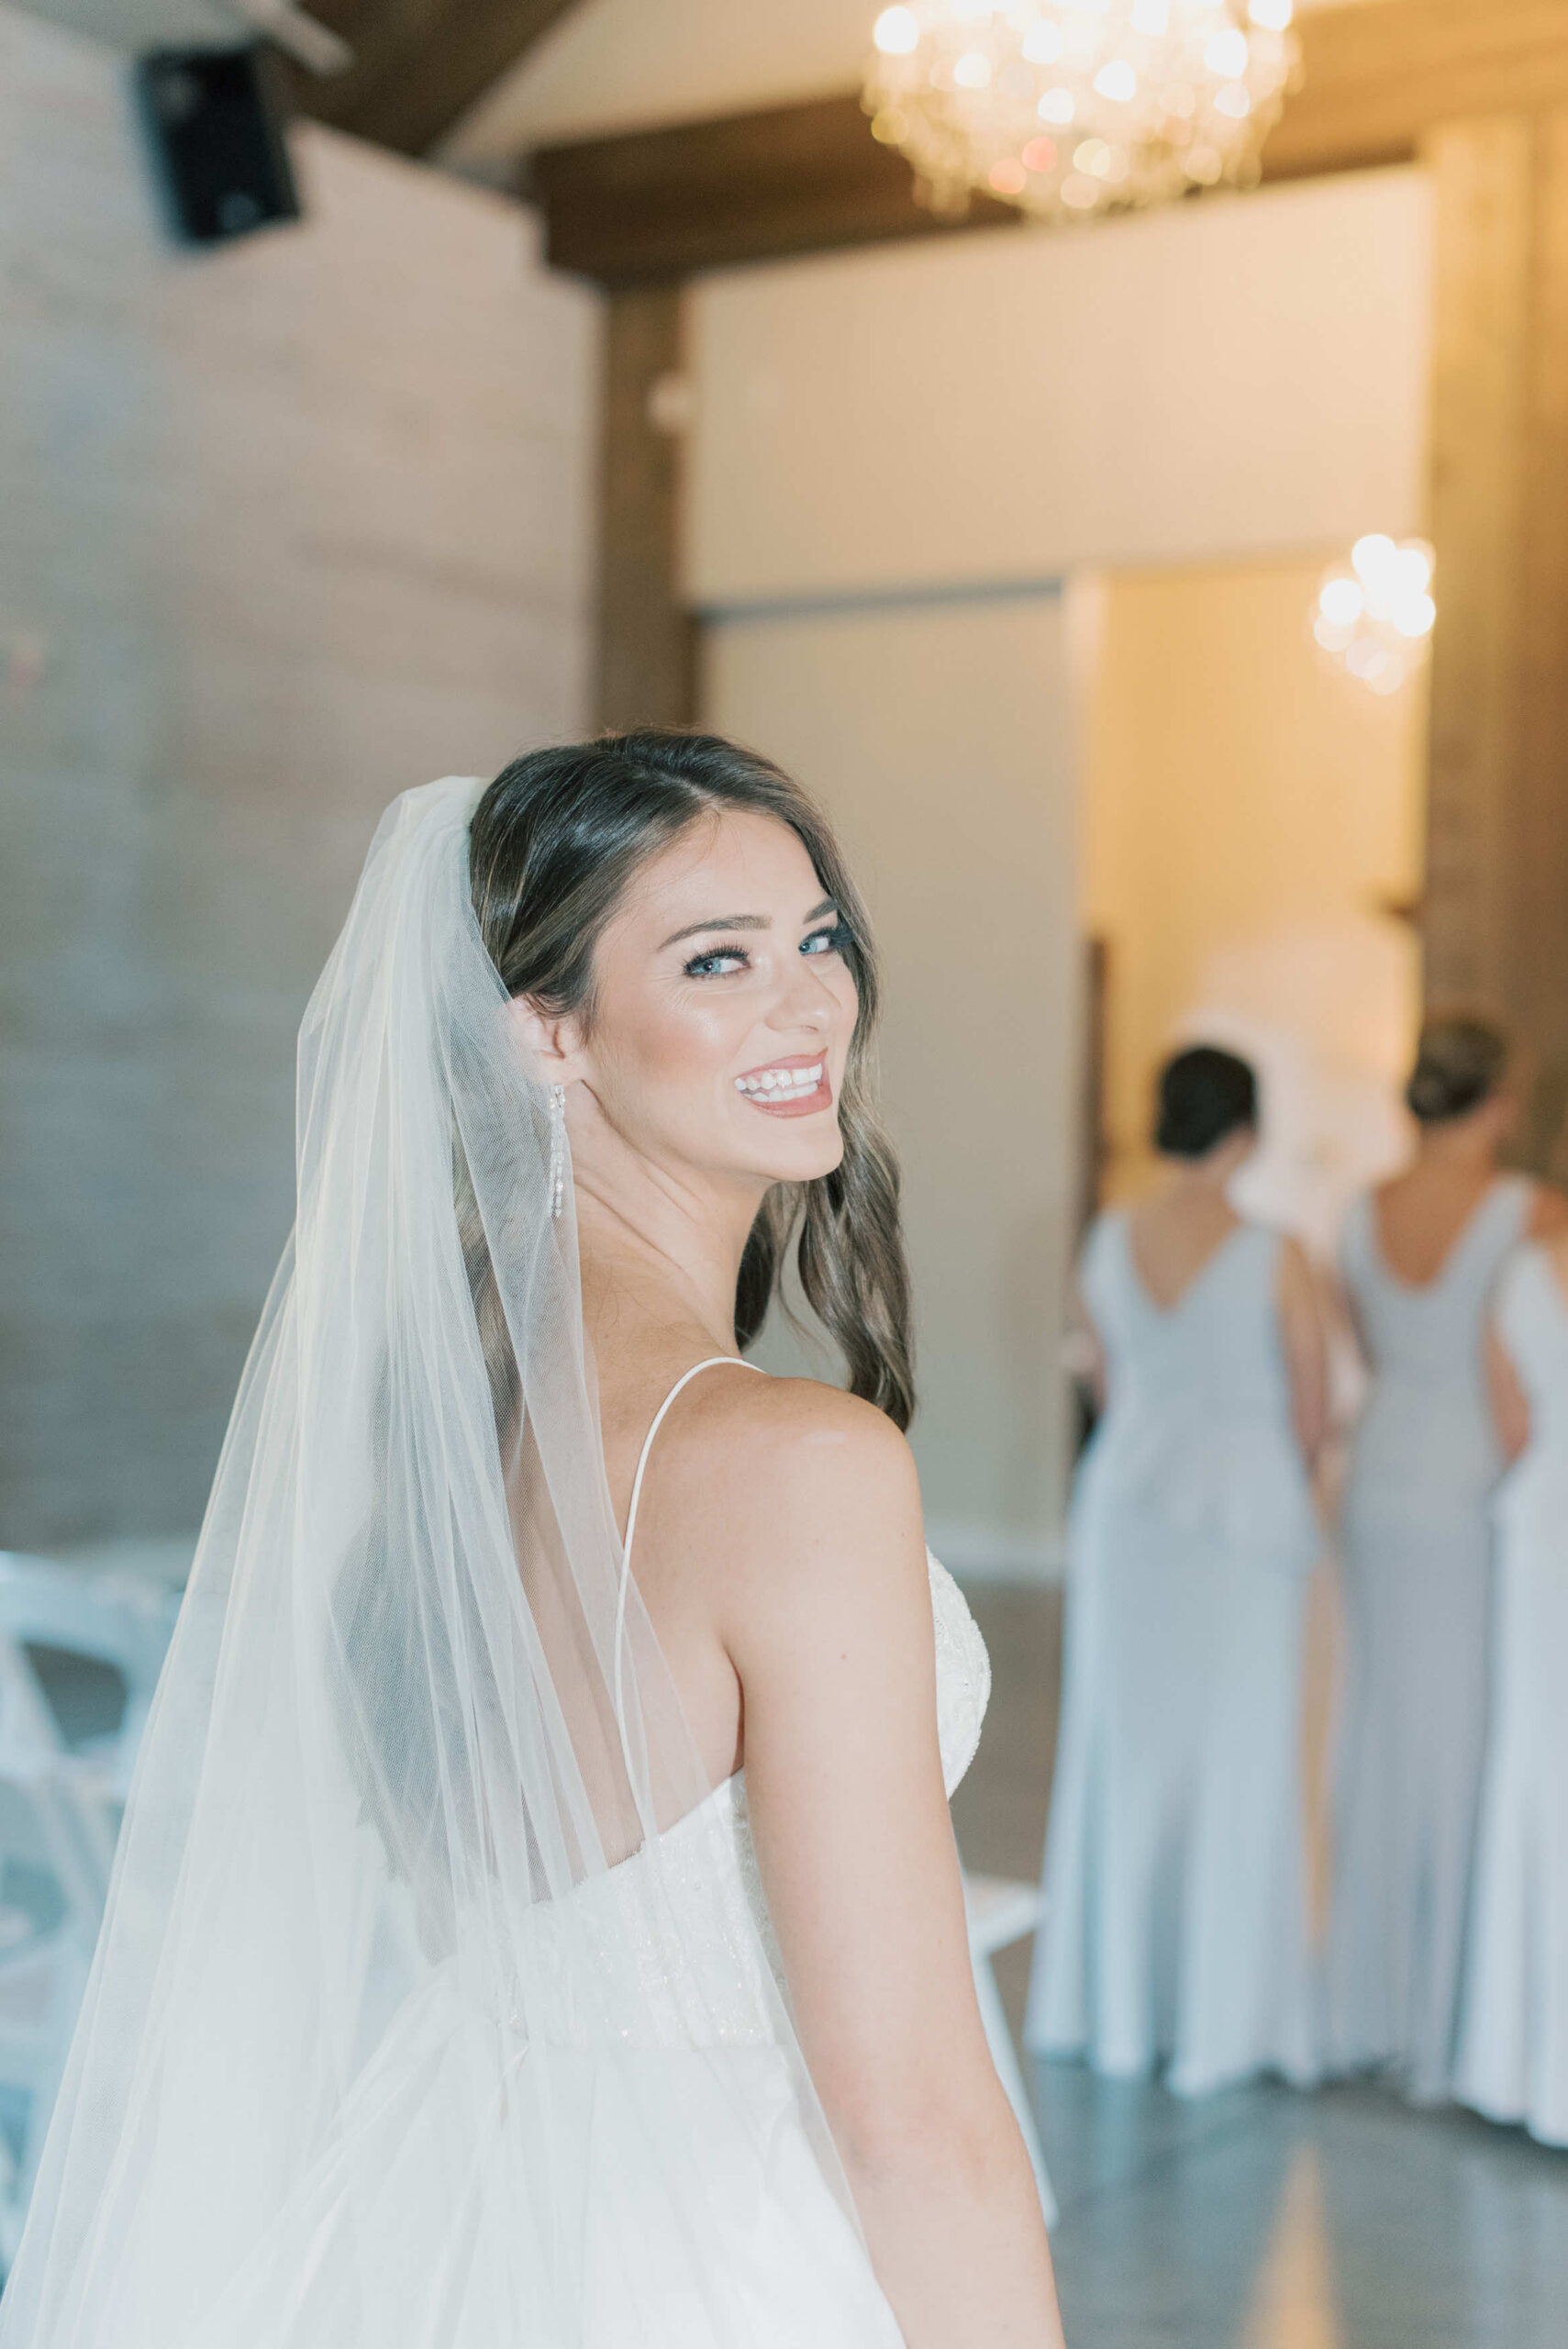 A bride smiling at the camera before her first look with her bridesmaids in the Carriage House facility of Park Crest wedding venue in Hoover, AL